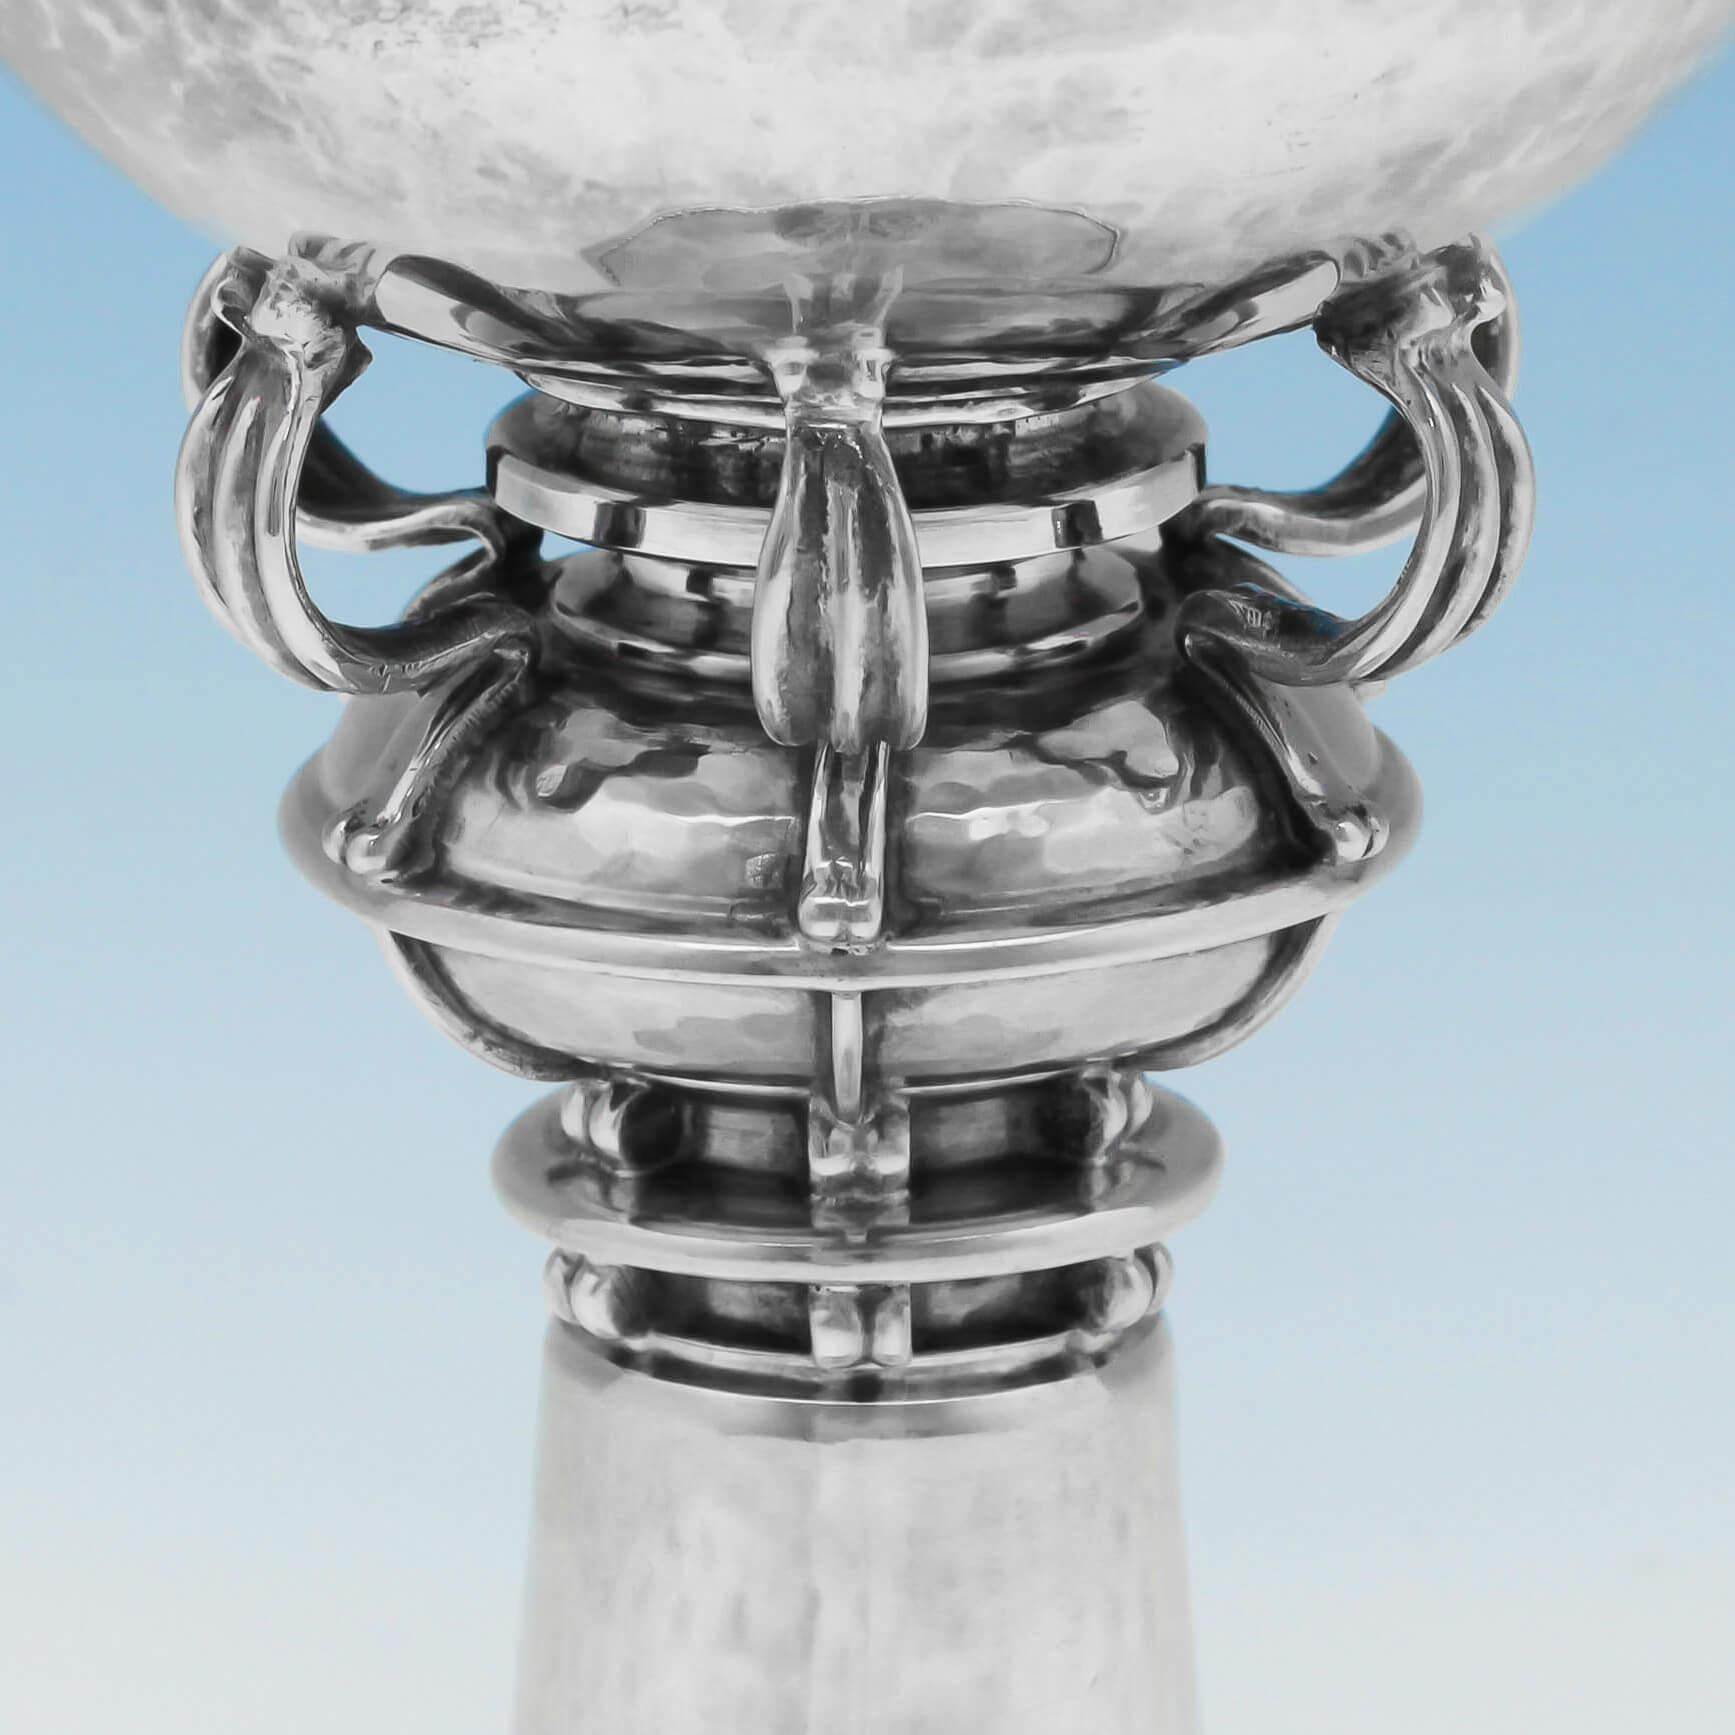 Hallmarked in London in 1920 by Omar Ramsden, this rare, striking, sterling silver goblet, is in the Arts & Crafts style, featuring a hand hammered finish, rope detailing, and an ornate scroll support knop. The goblet is chased with the initials of